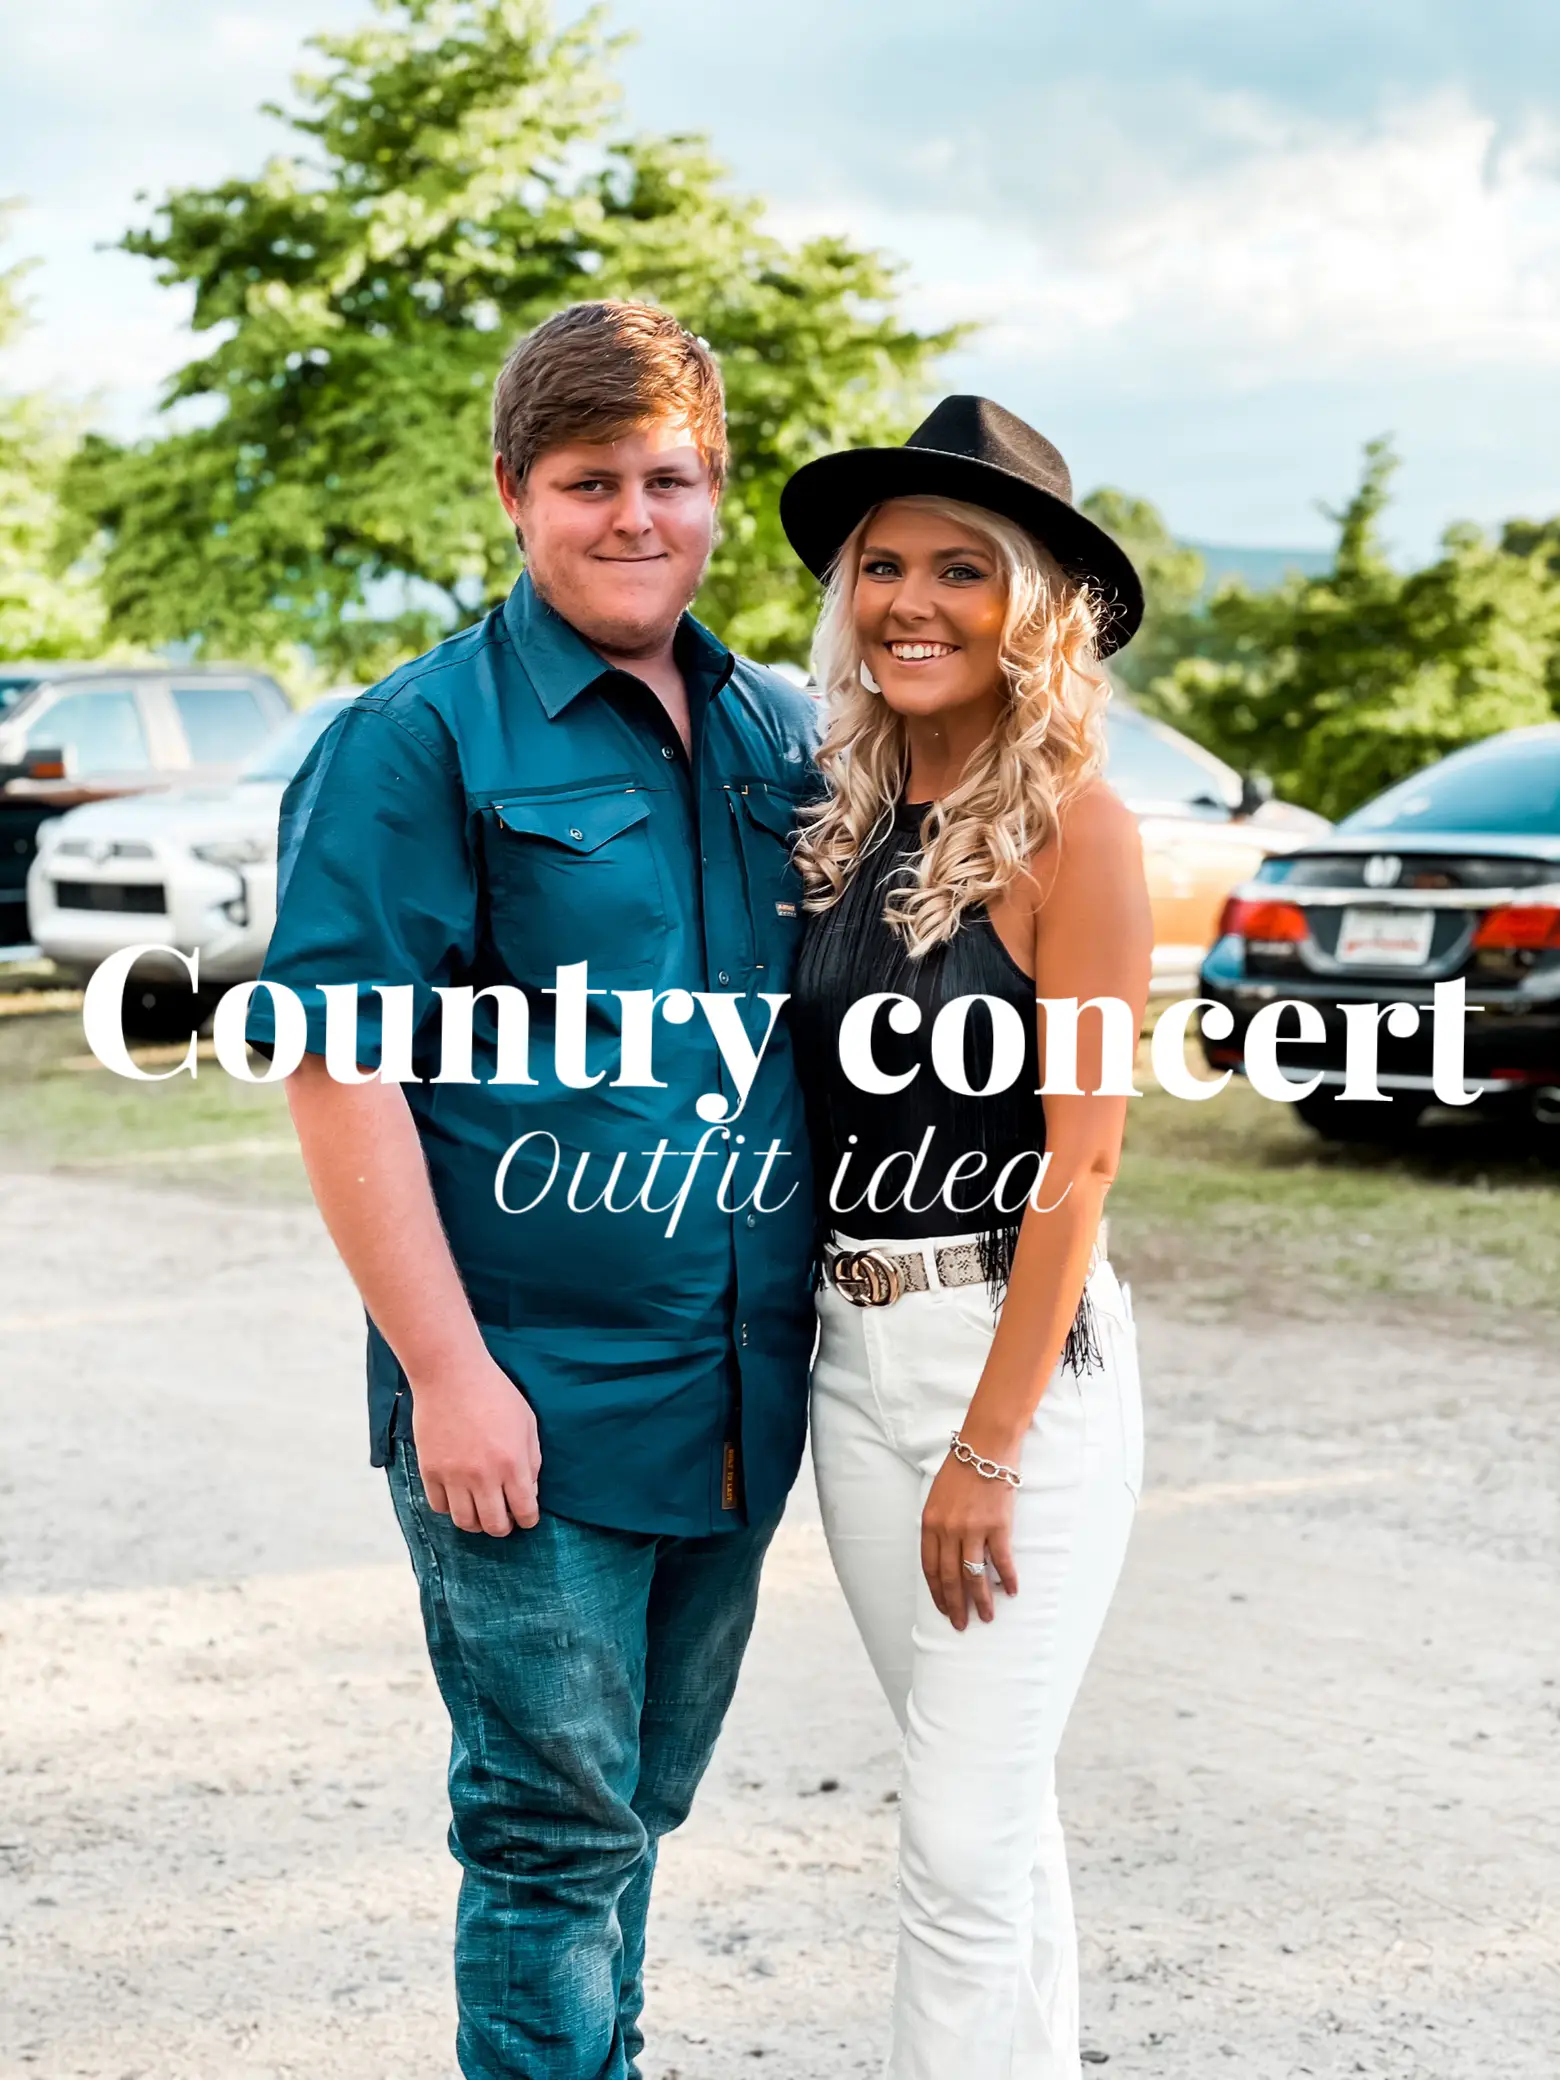 country concert outfit ideas for women